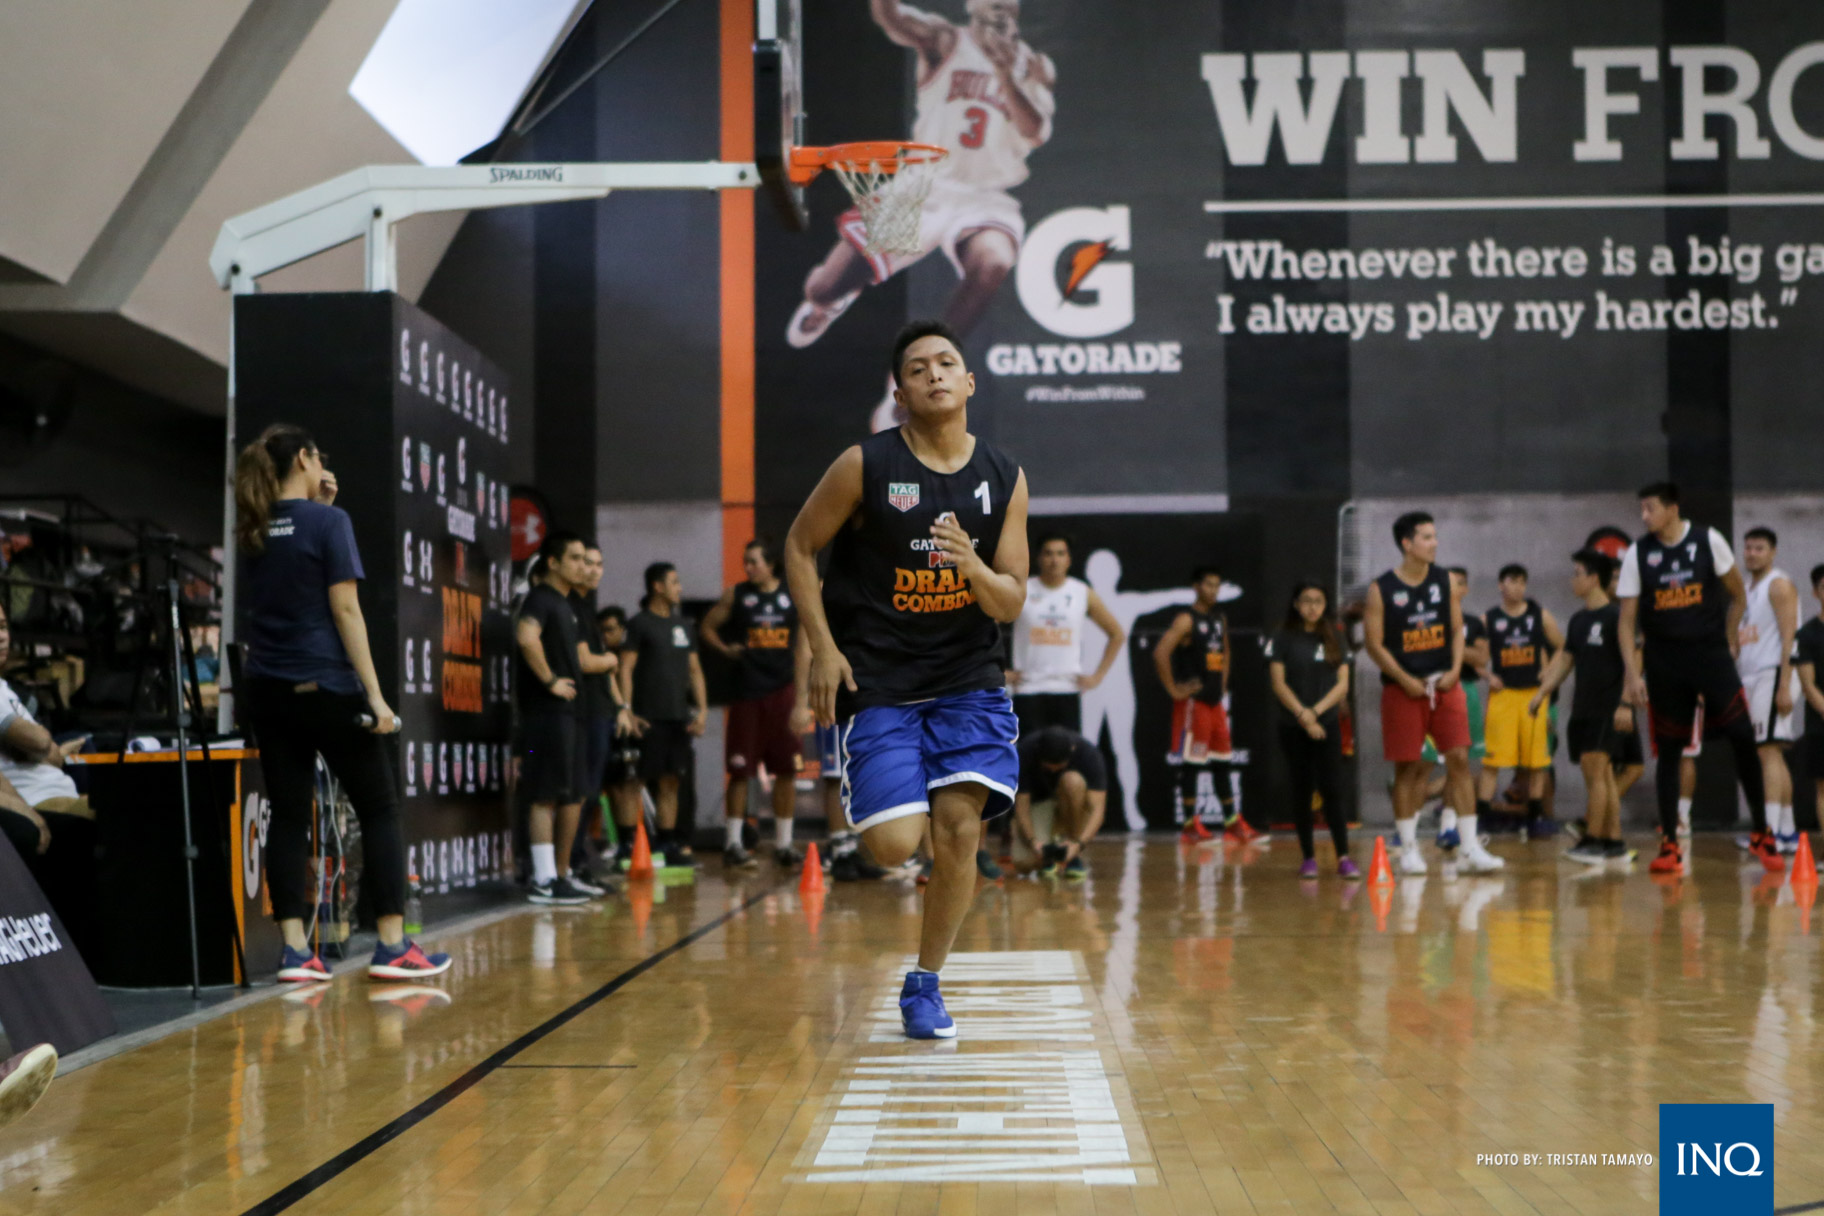 Mike Tolomia goes through a drill at the 2016 PBA Rookie Draft Combine. Photo by Tristan Tamayo/INQUIRER.net